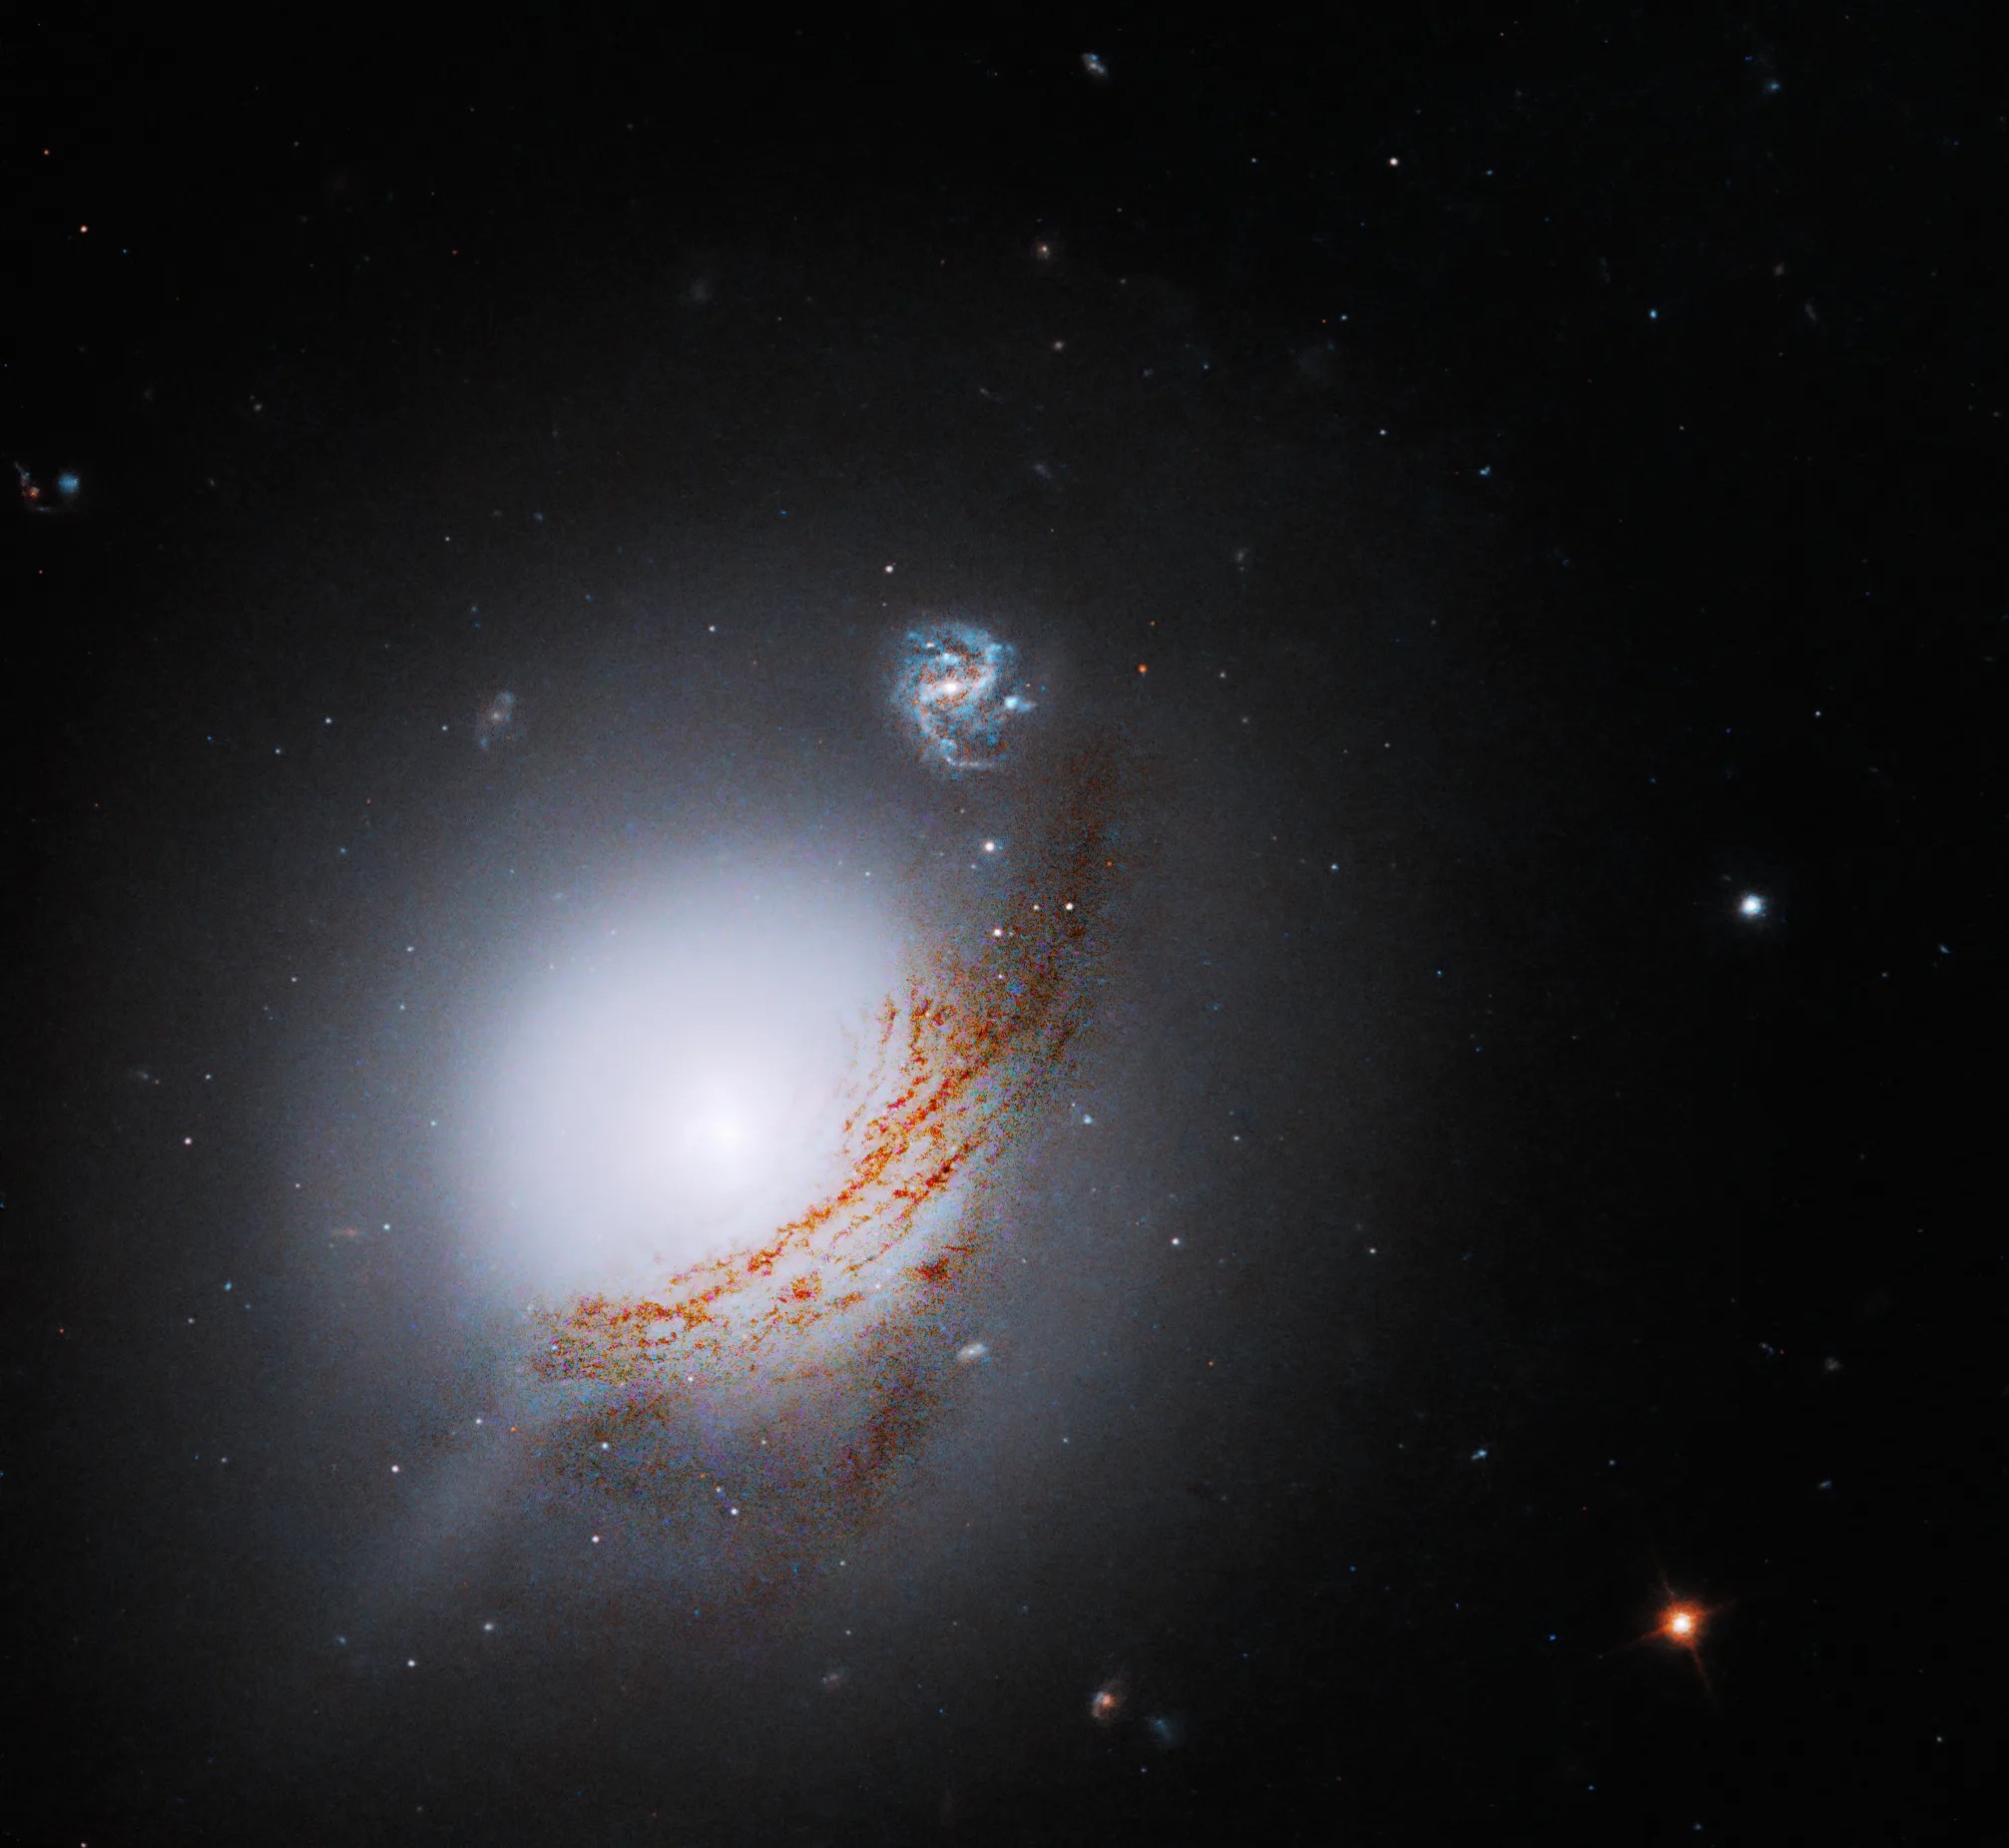 Bright-white galaxy stretching across the center of the frame from left to right. The galaxy's core is brightest at image center. Filaments of reddish-brown gas and dust follow the arc of the galaxy's curve. All on a black background dotted with stars.